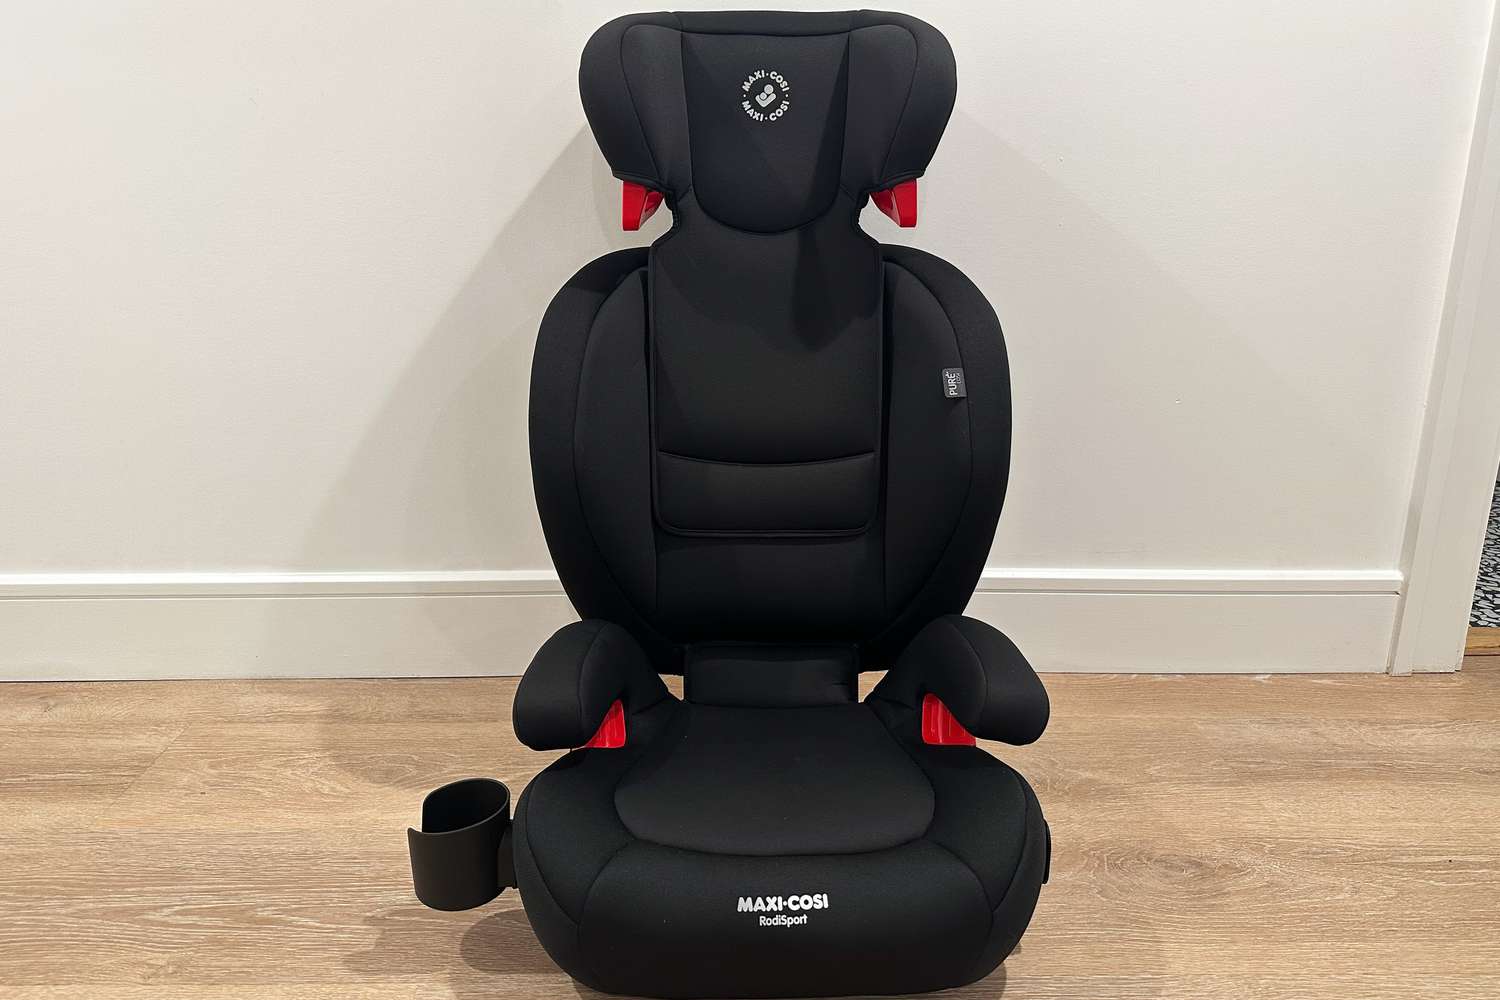 The Maxi-Cosi RodiSport Booster Car Seat on a wood floor